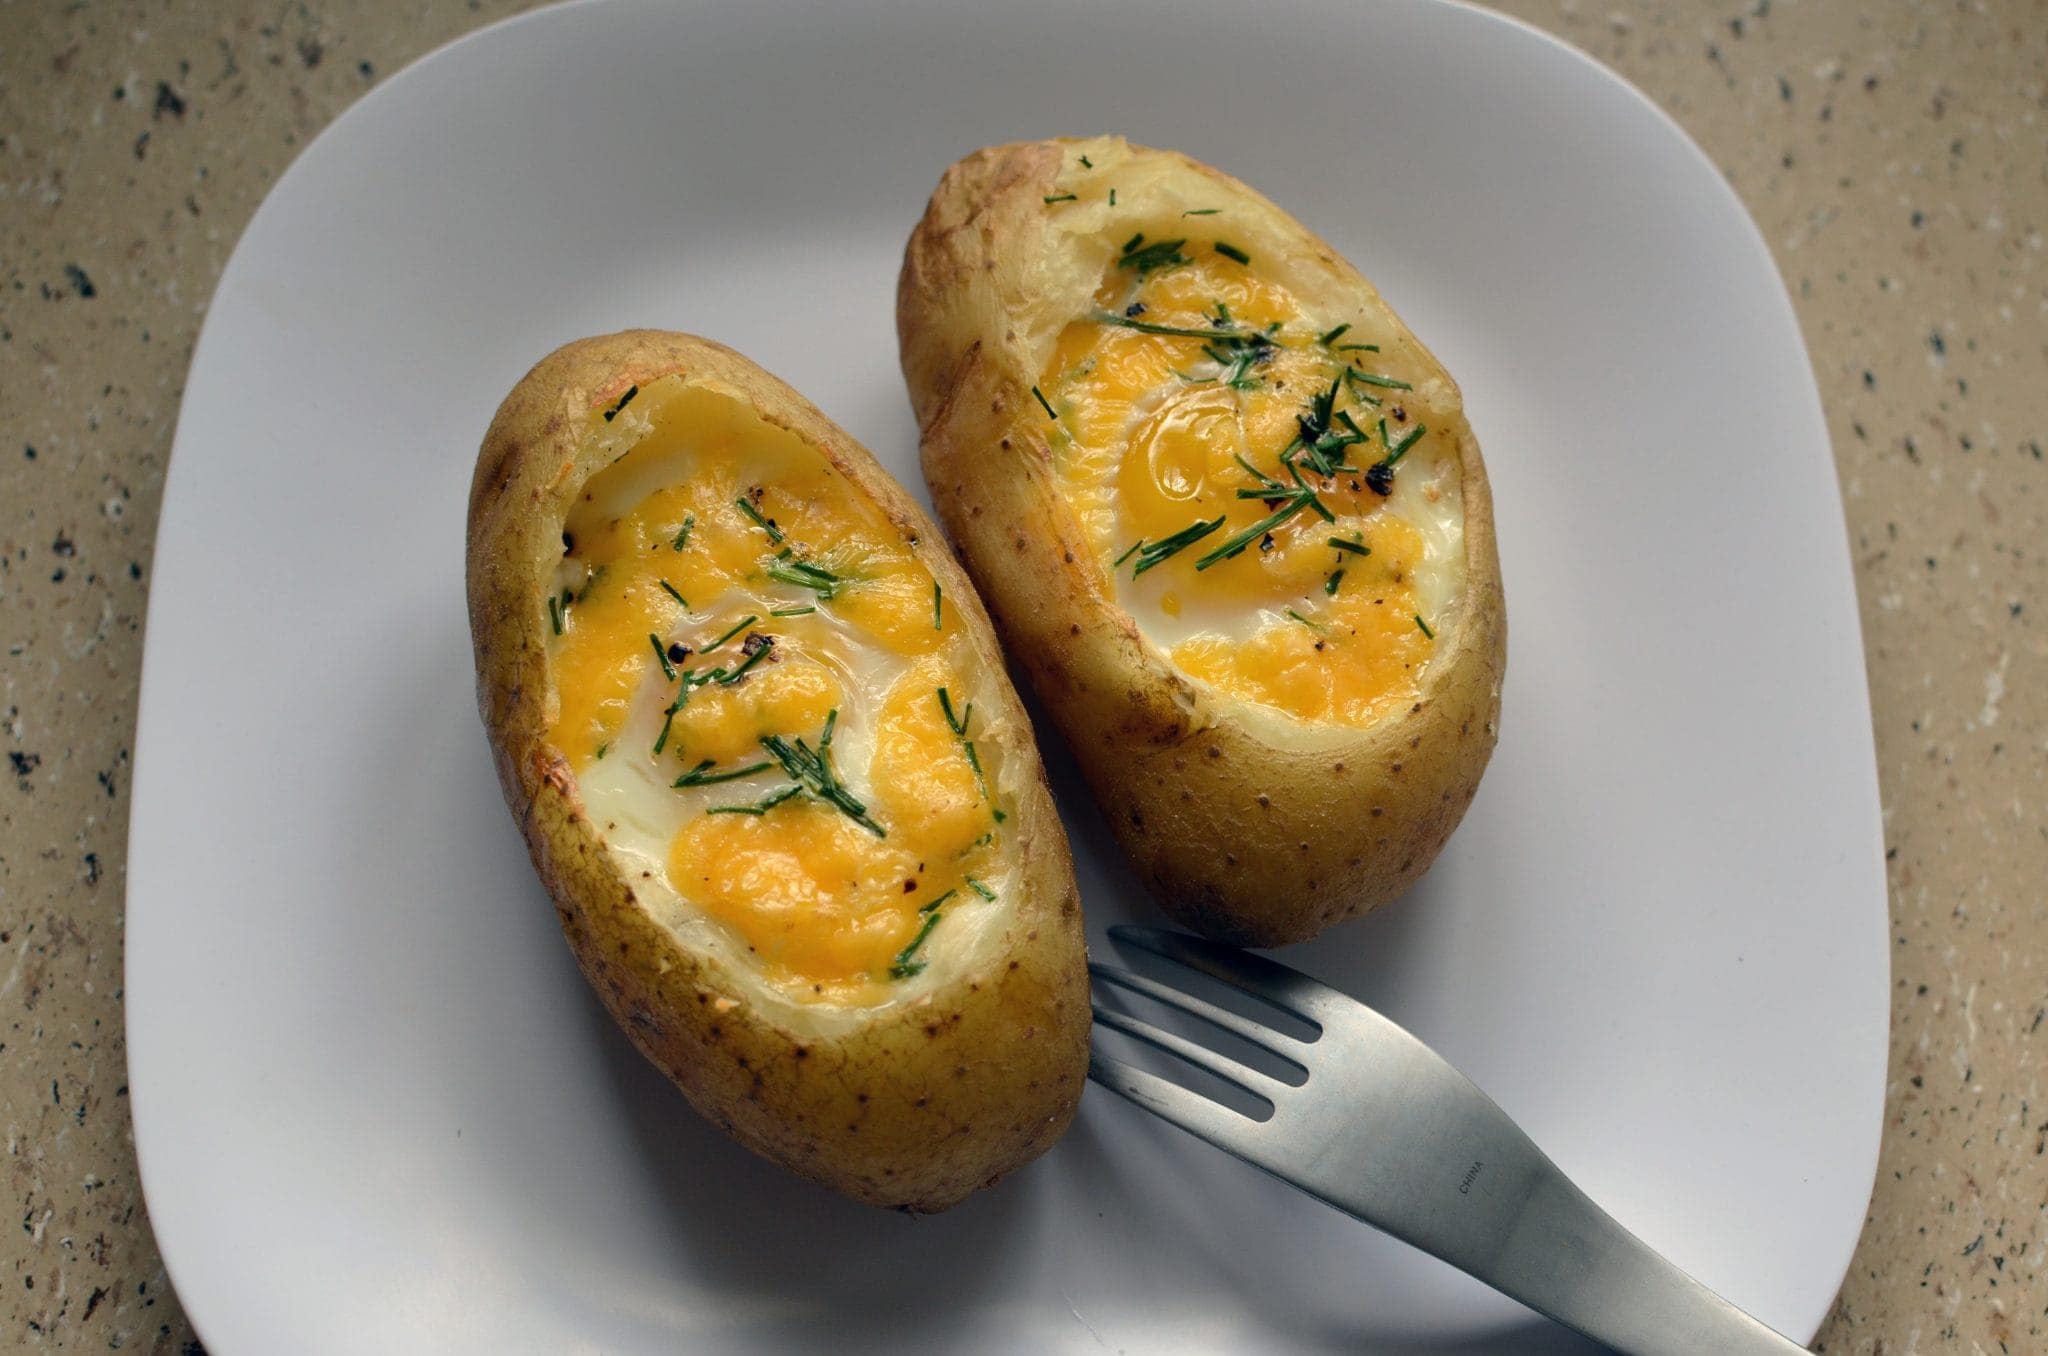 Top view of a baked egg in a baked potato on a white plate.